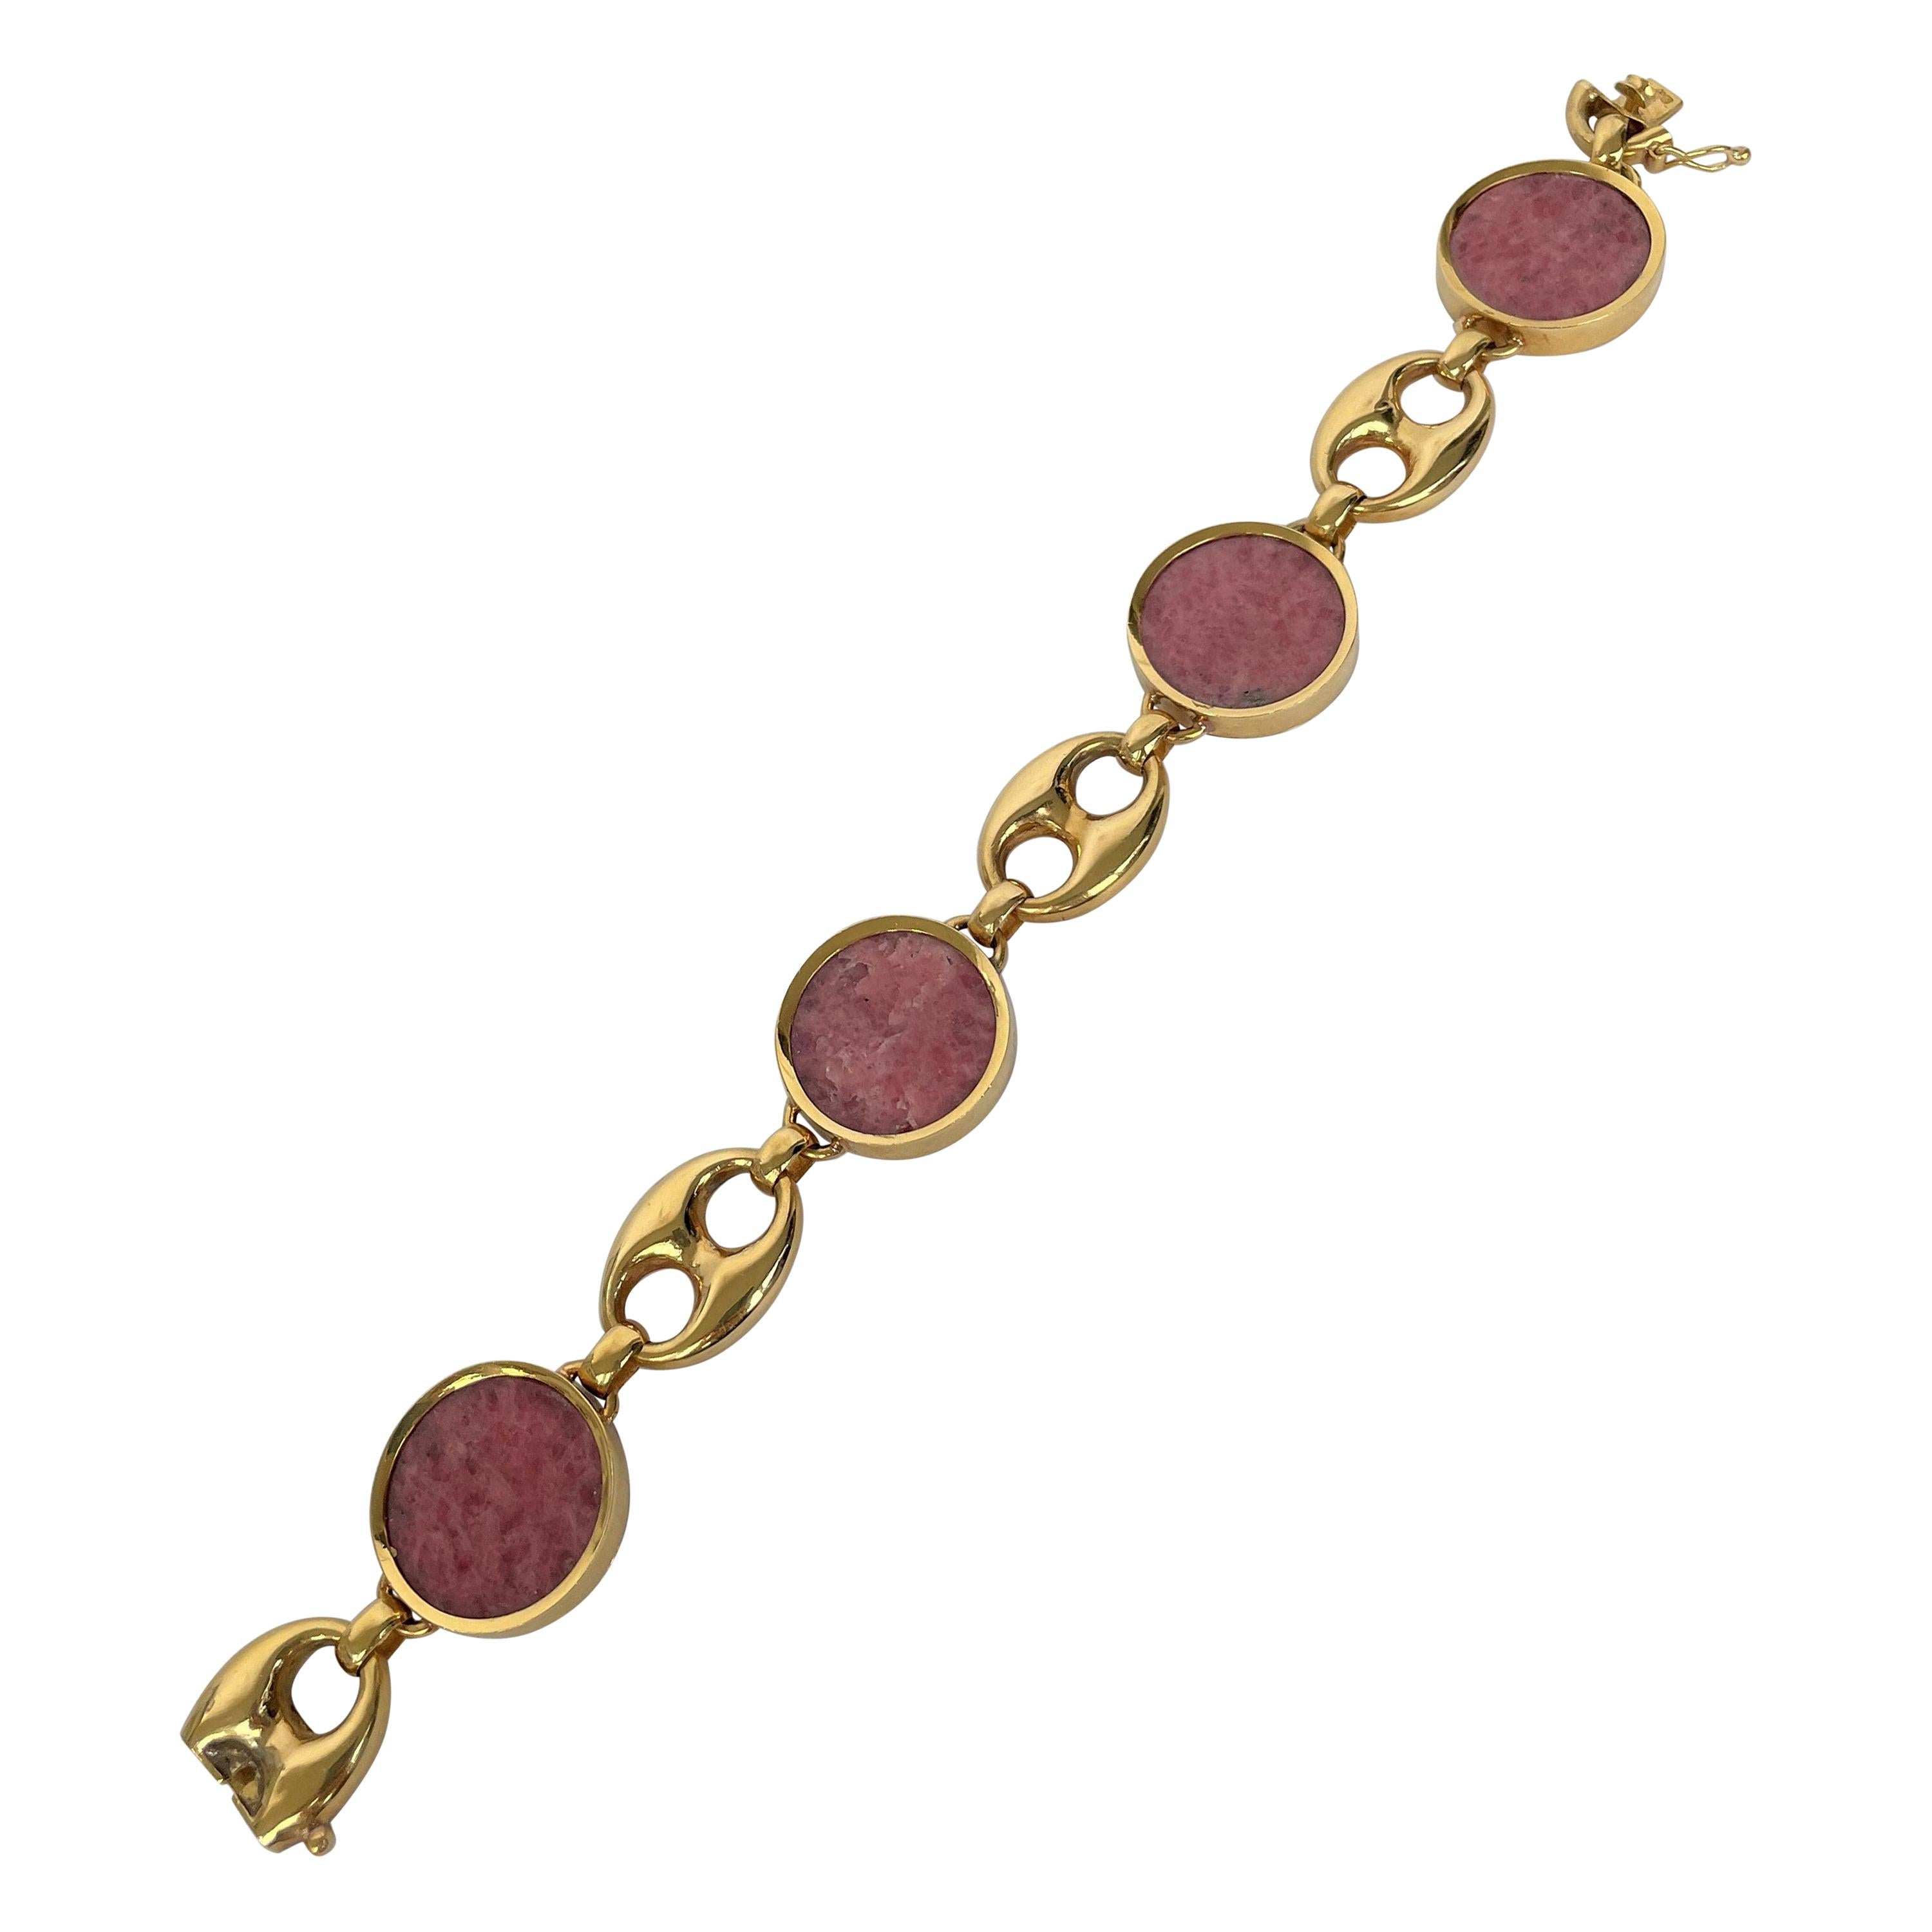 Contemporary Agate and Yellow Gold "Marina" Link Bracelet